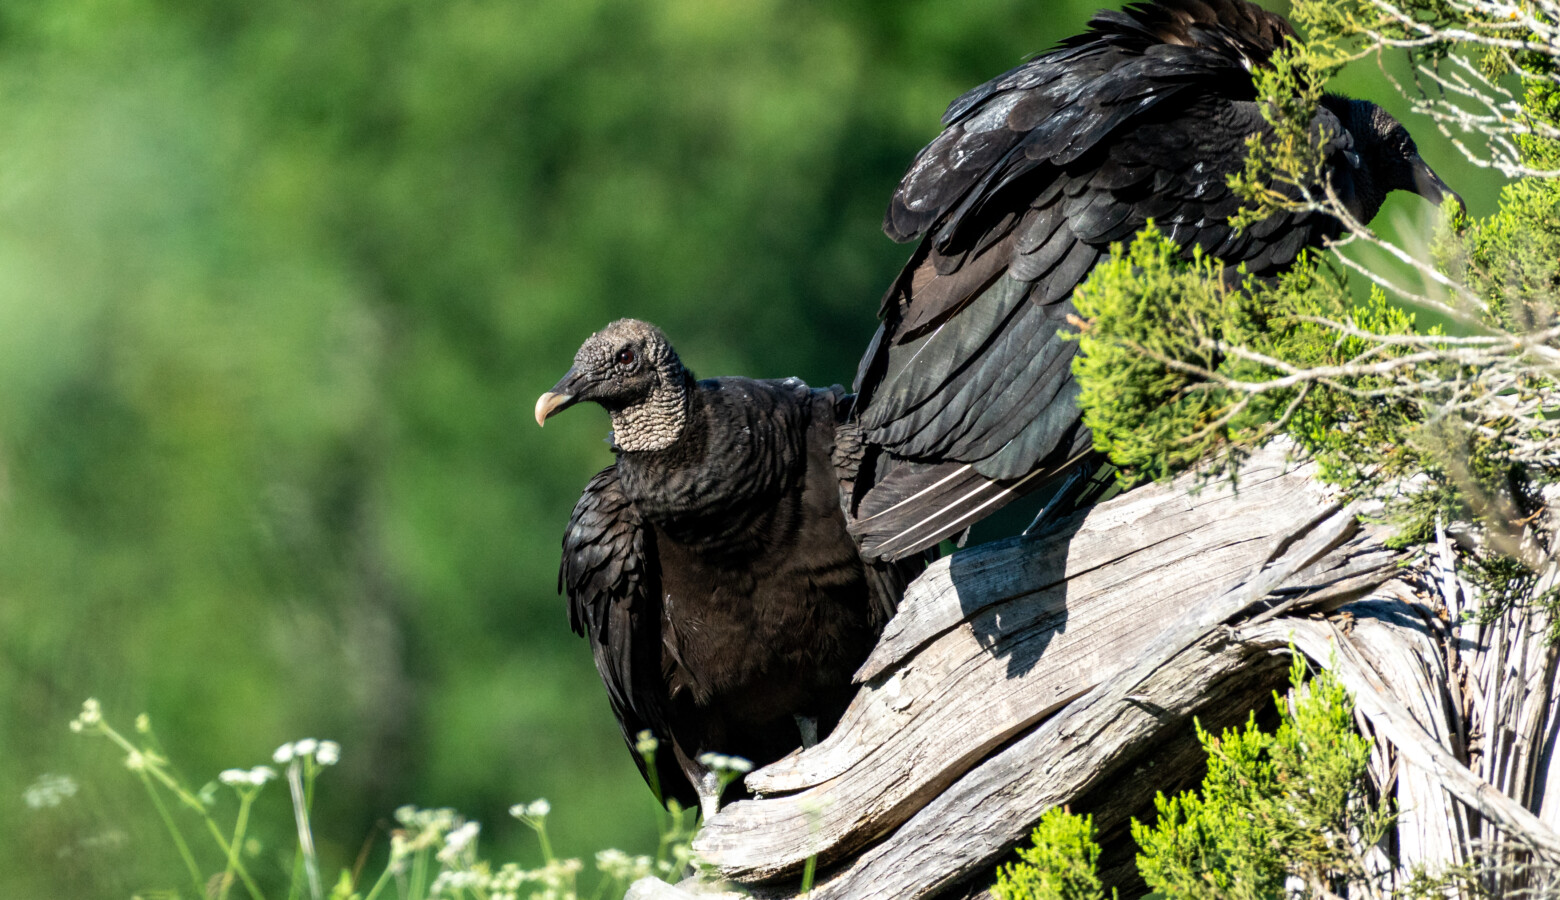 Black vultures at a park near Austin, Texas. Not to be confused with red-headed turkey vultures, some farmers say black vultures have been harassing or killing their livestock. (Aleksomber/Wikimedia Commons)